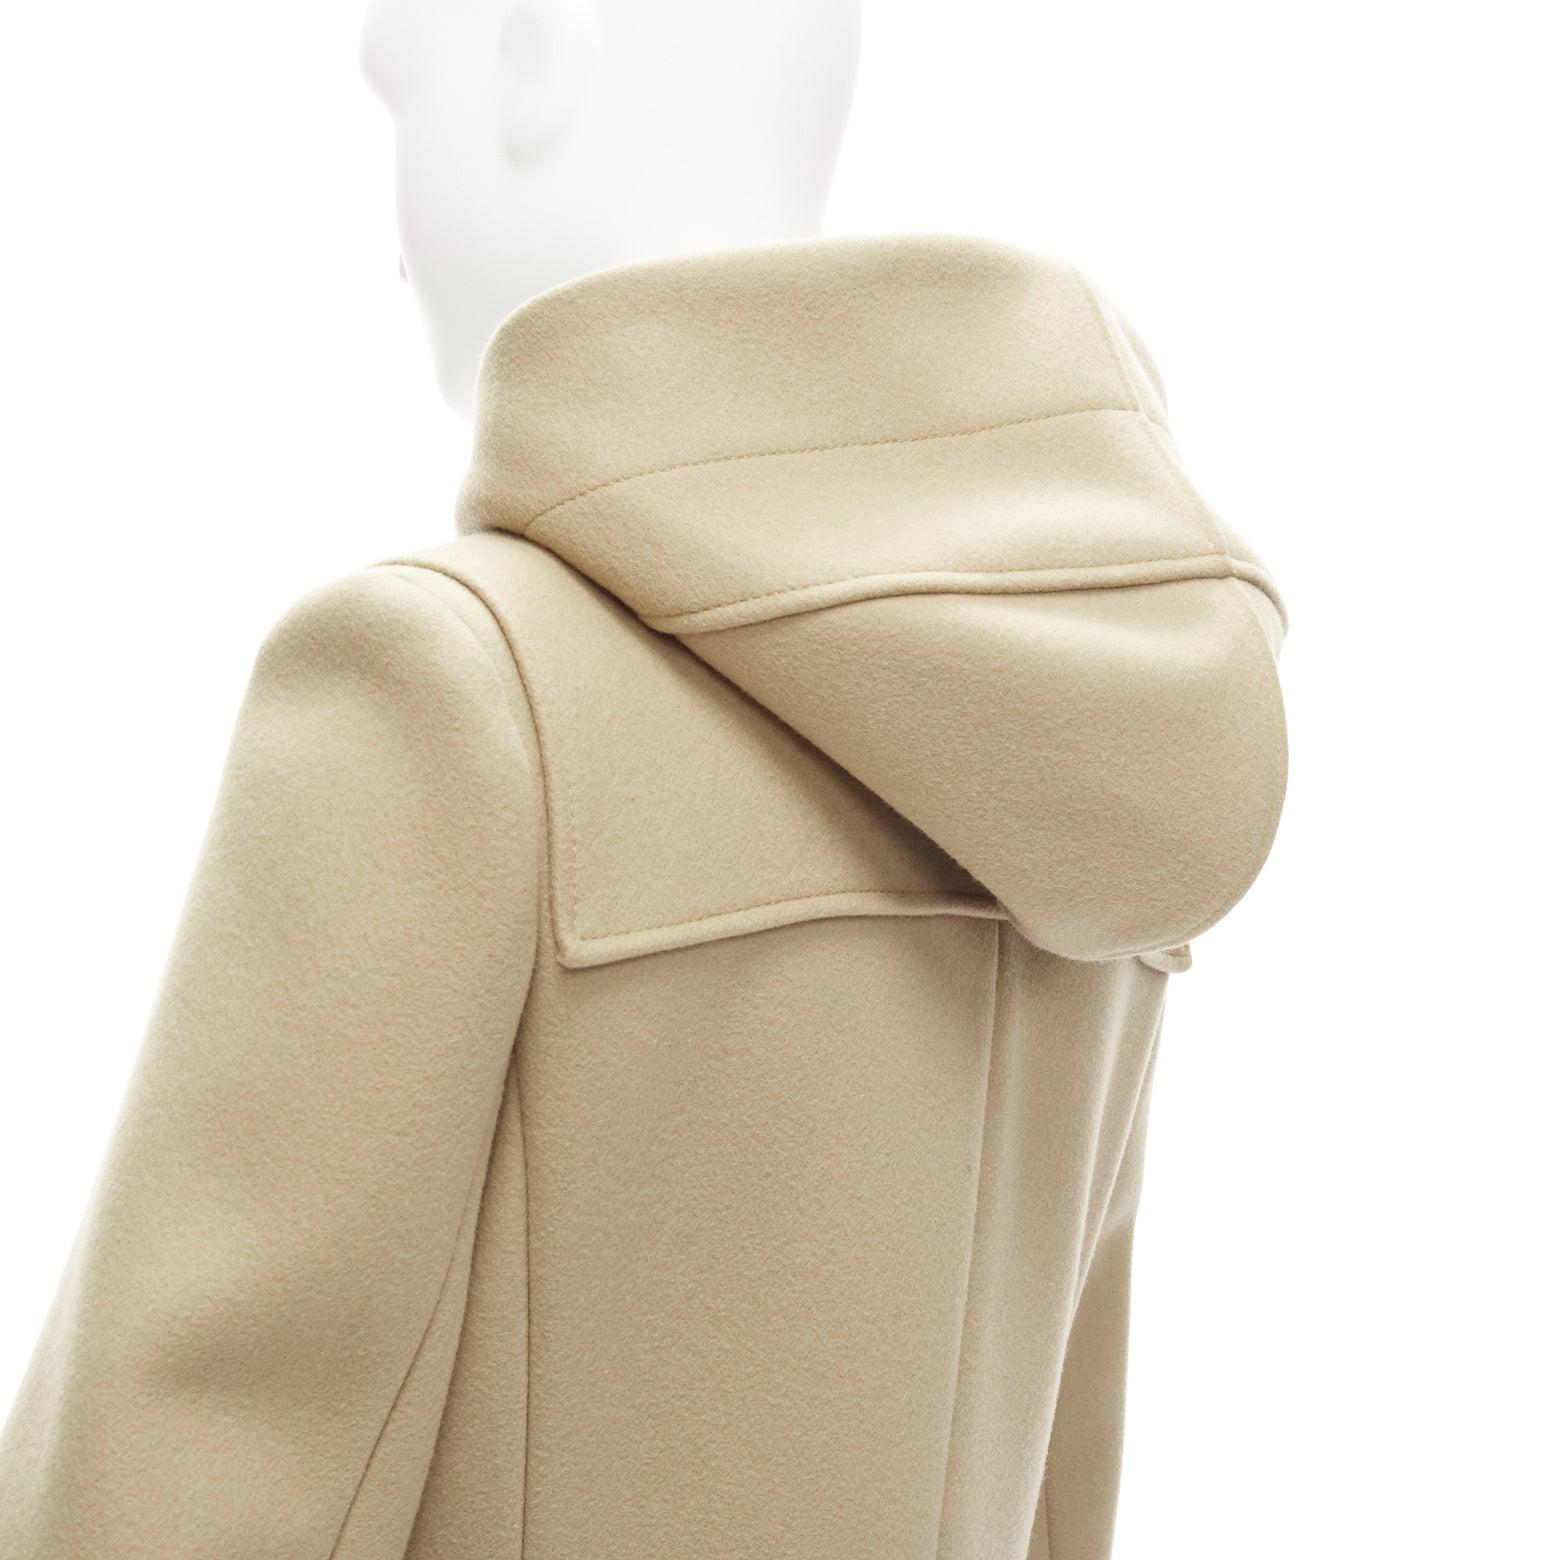 BALENCIAGA 2005 Ghesquiere beige wool blend toggle hooded coat FR38 M 1